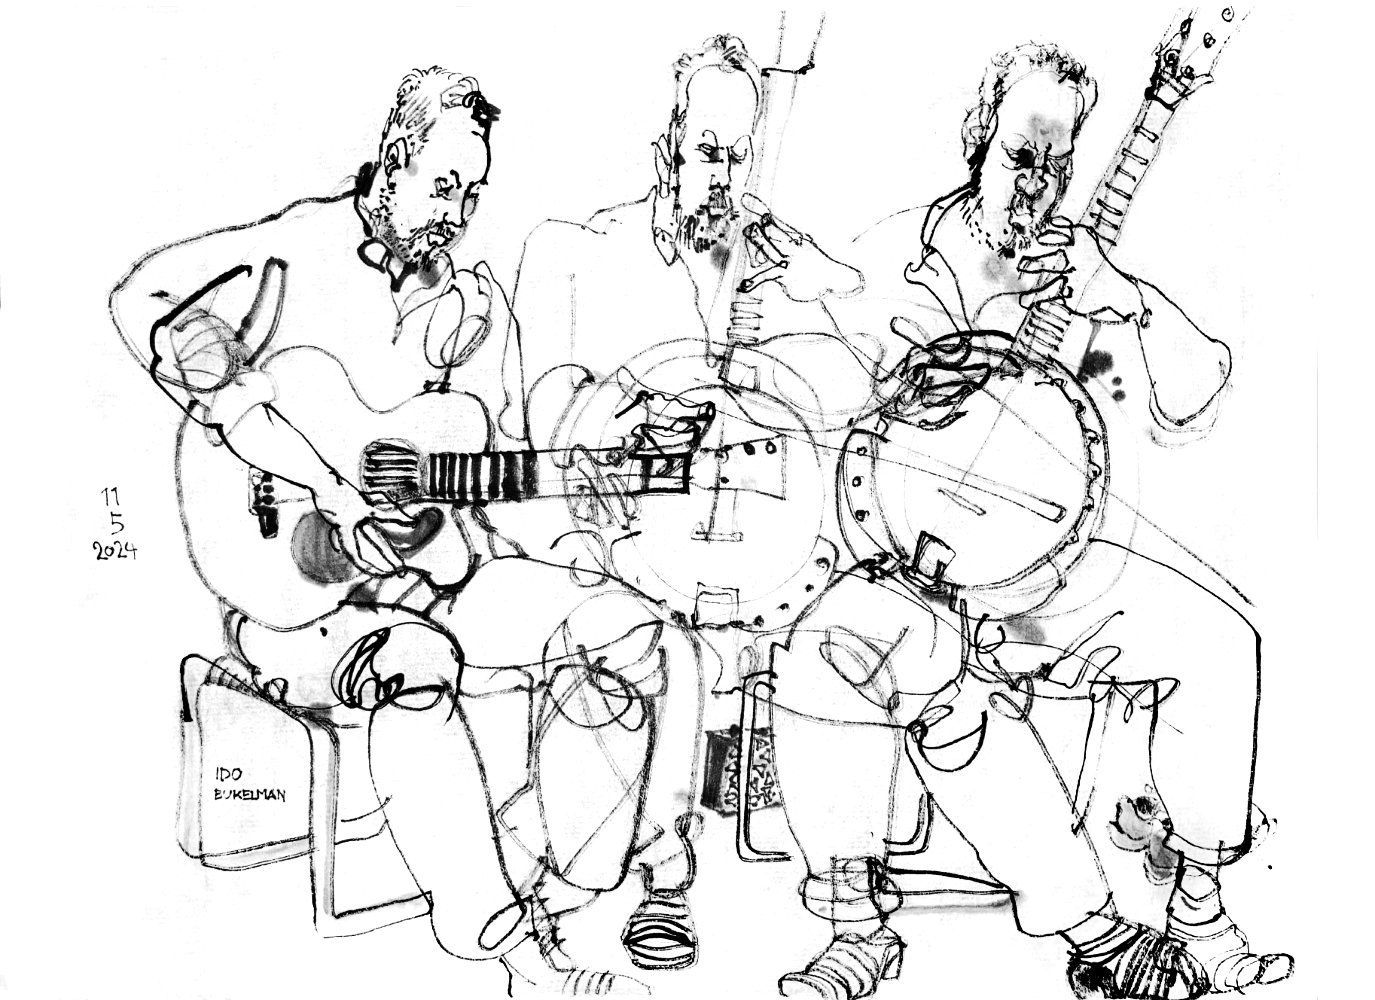 Ink drawing of a male musician, depicted three times, once playing an acoustic guitar, twice playing a banjo with a bow